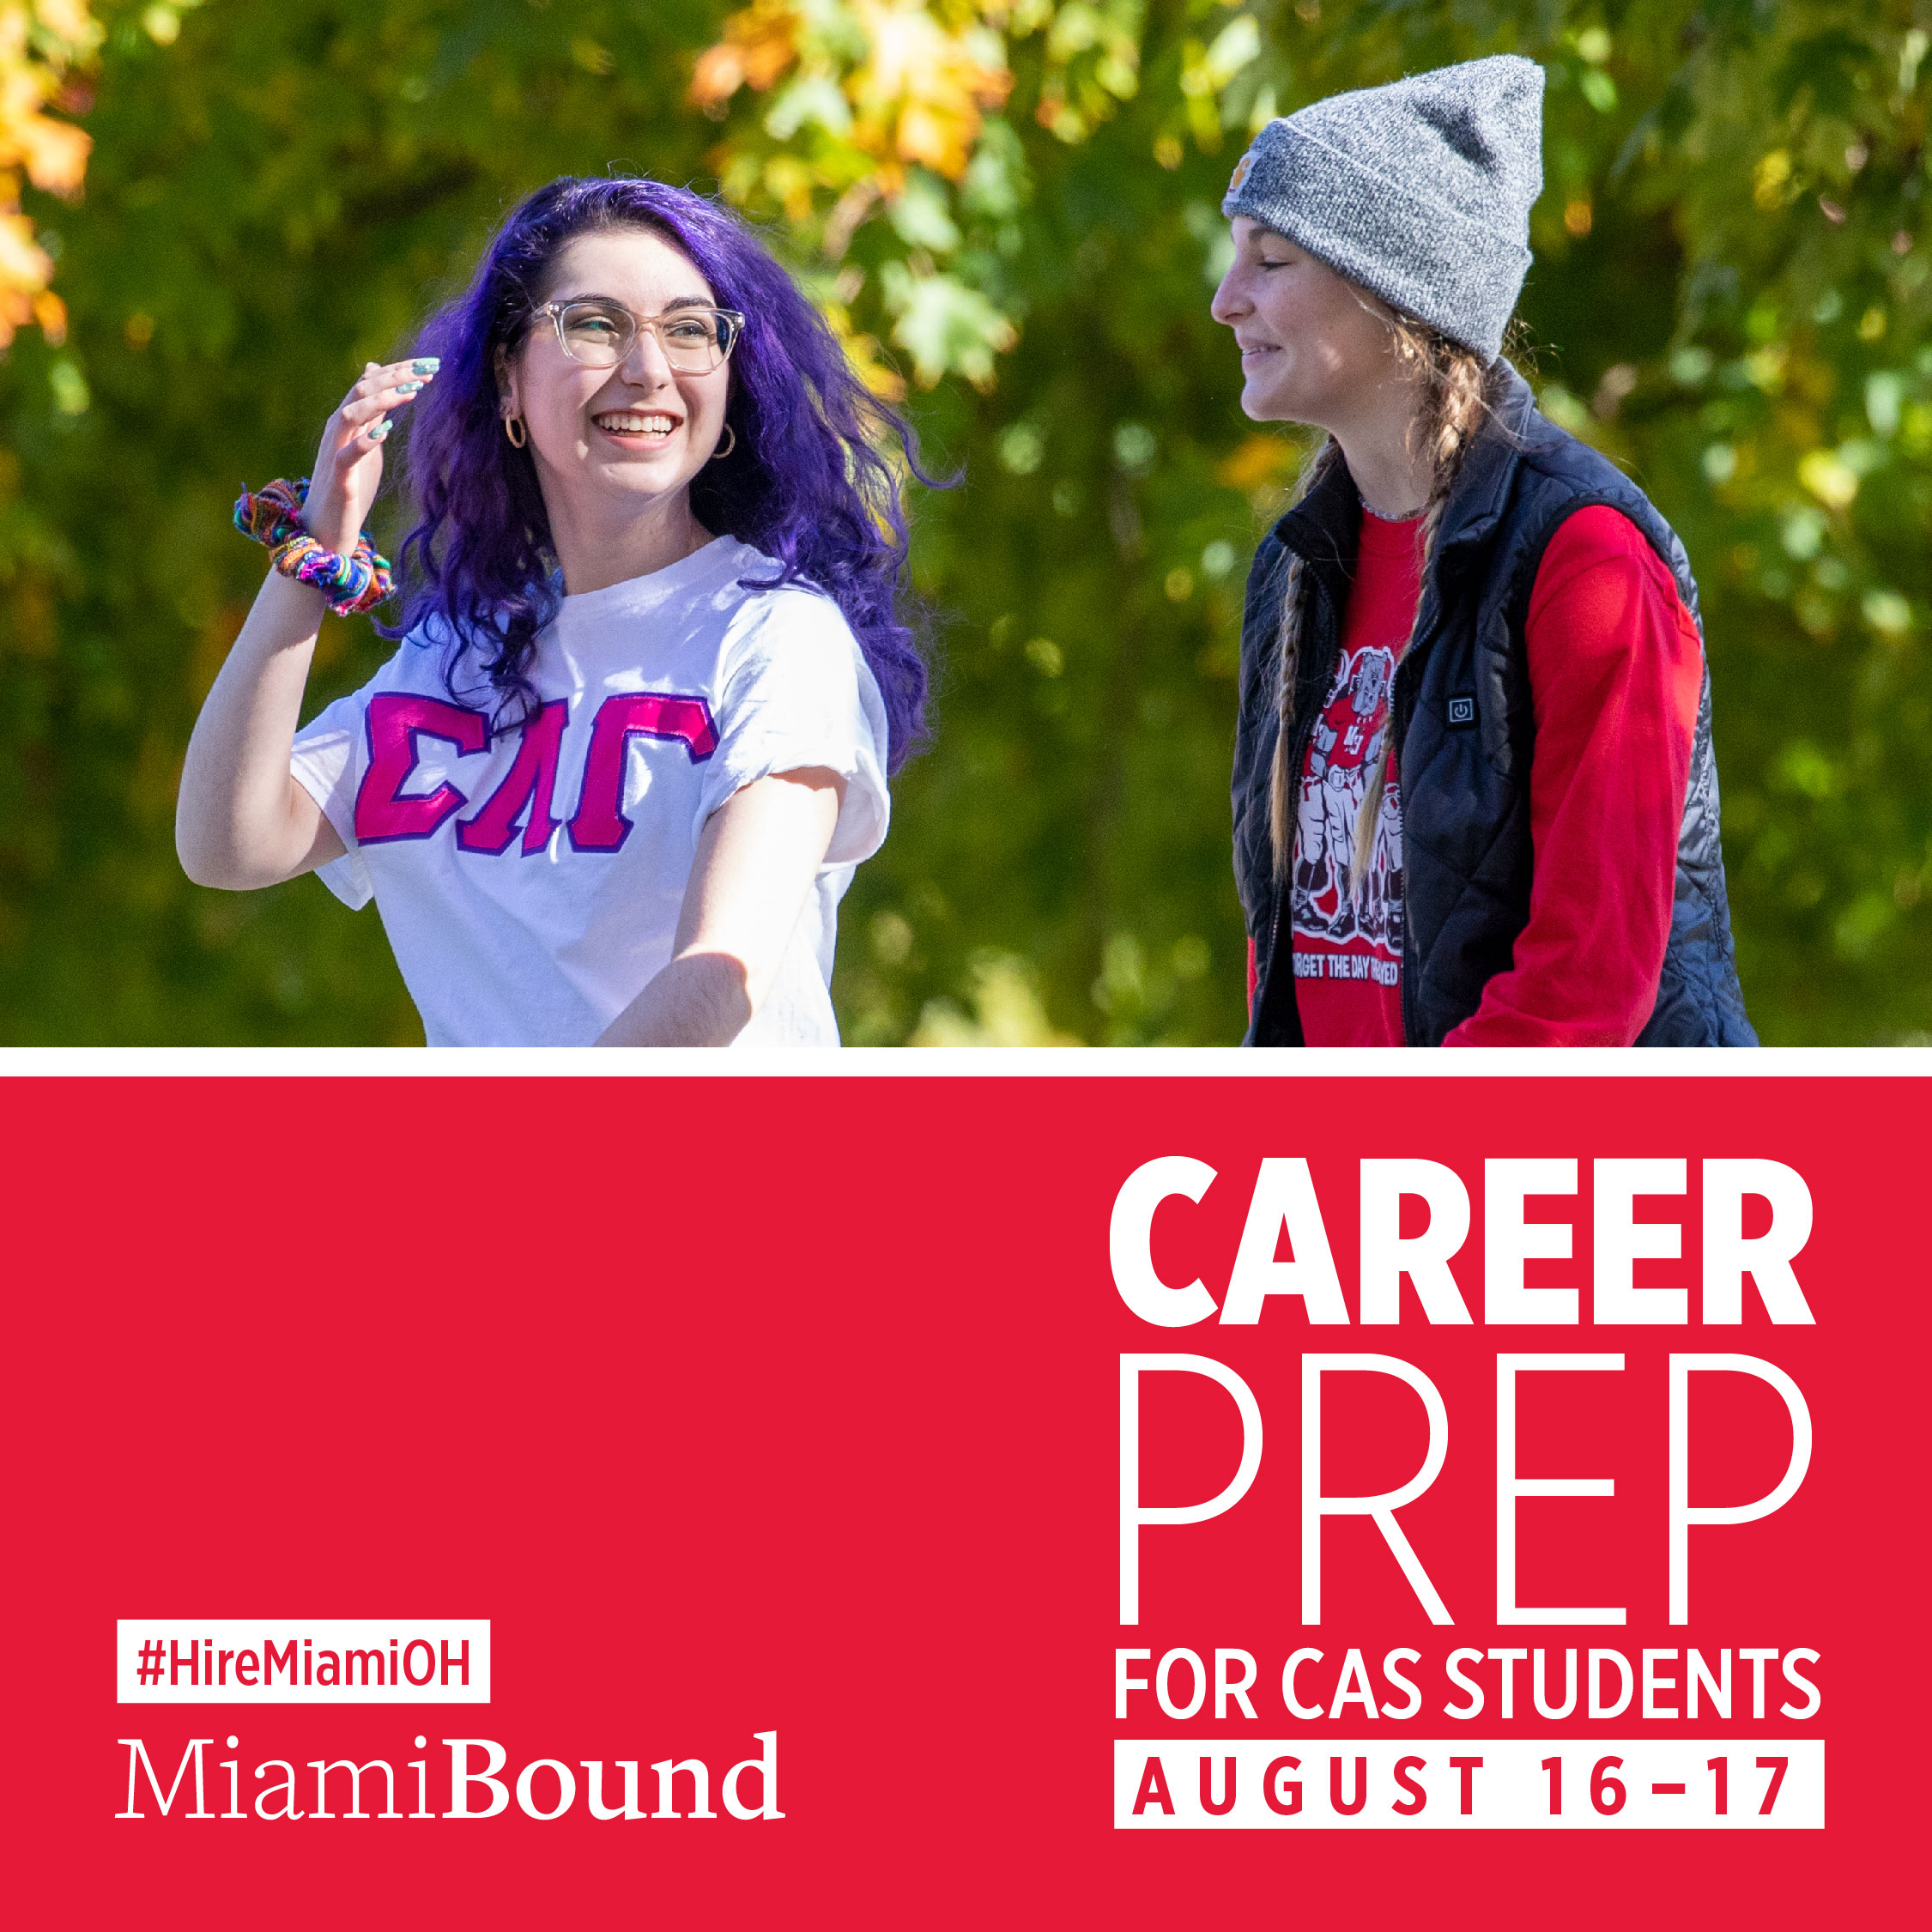 #HireMiamiOH Miami Bound: Career Prep for CAS Students